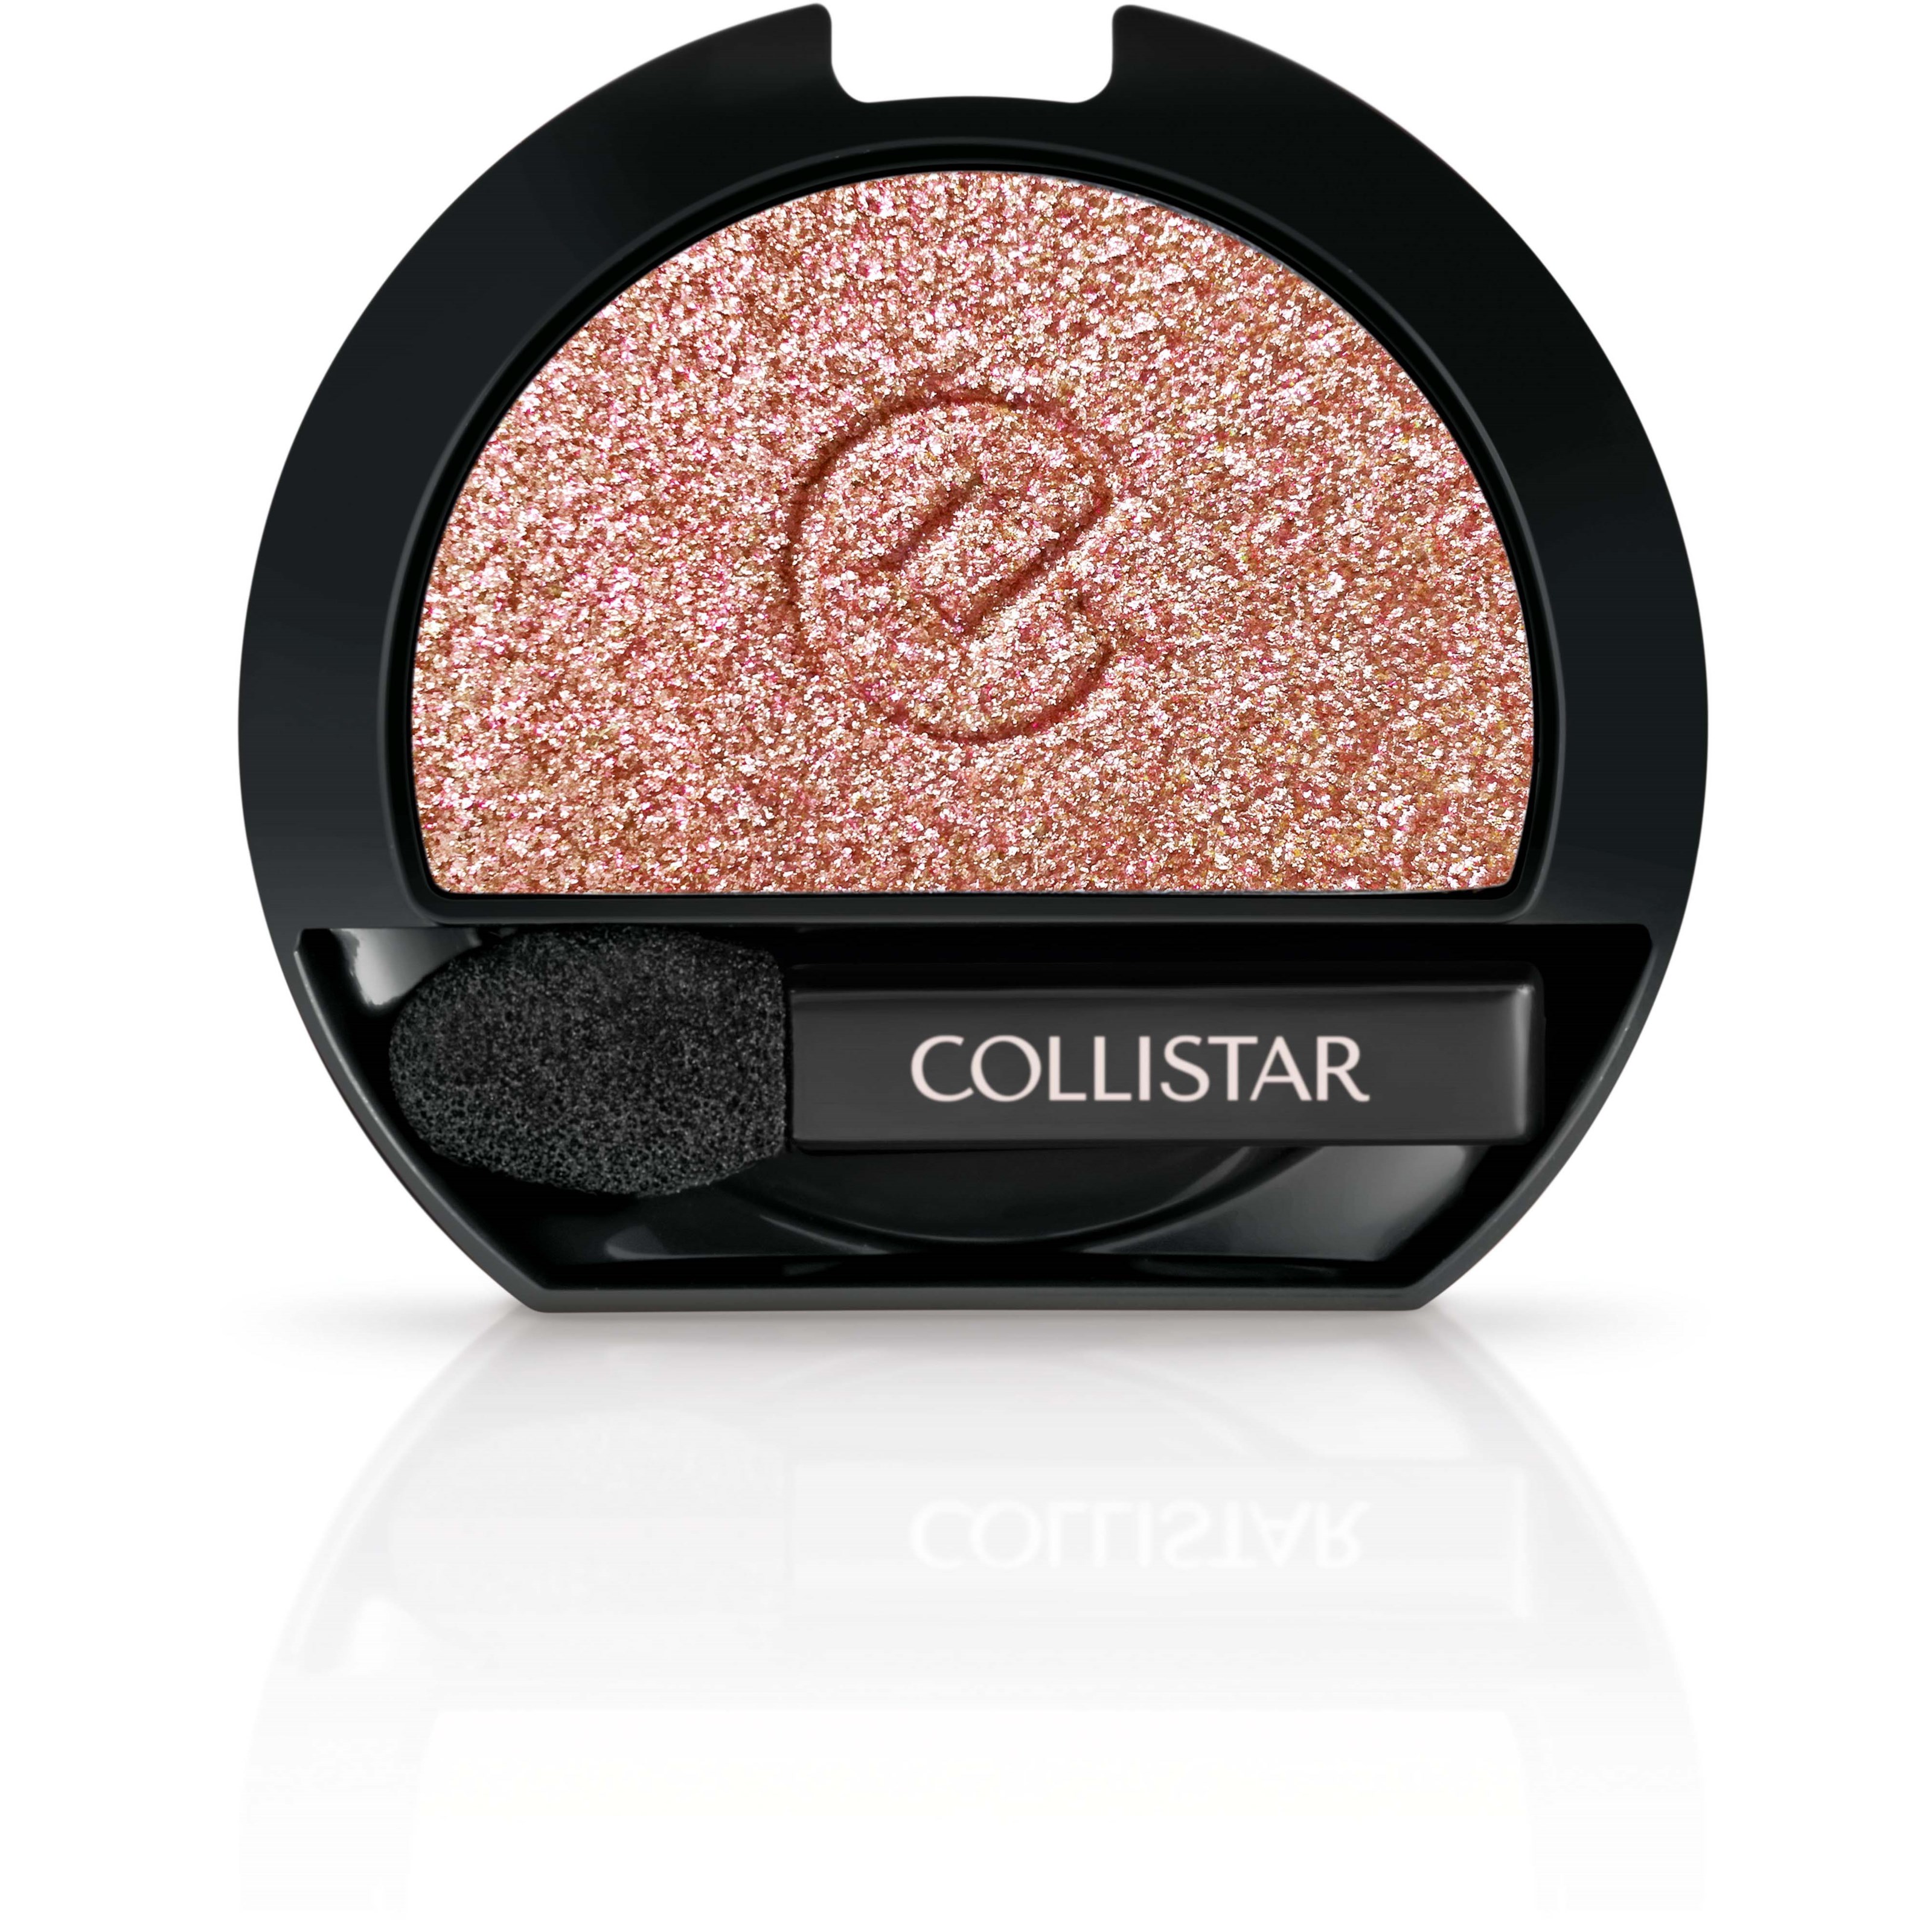 Läs mer om Collistar Impeccable Refill Compact Eyeshadow 300 Pink Gold Frost